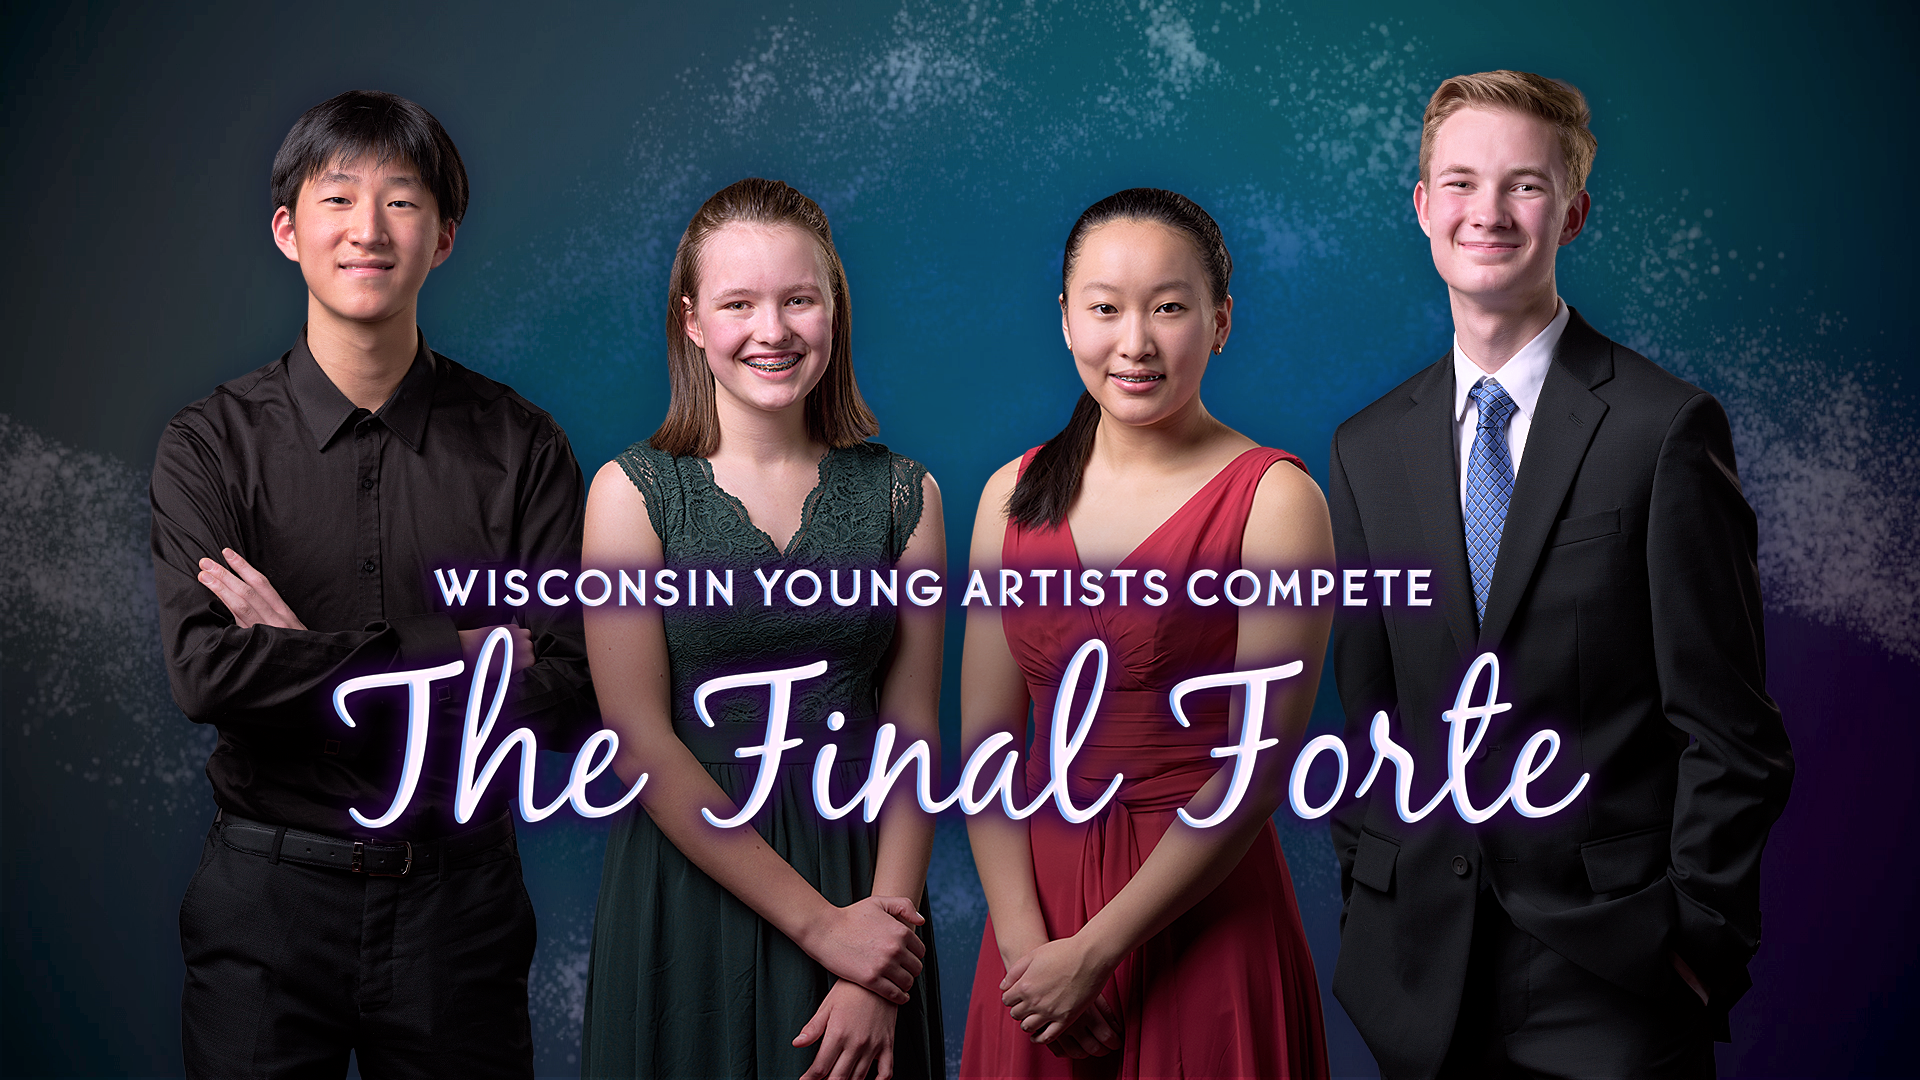 Four young musicians, the Final Forte finalists, pose together in formal attire